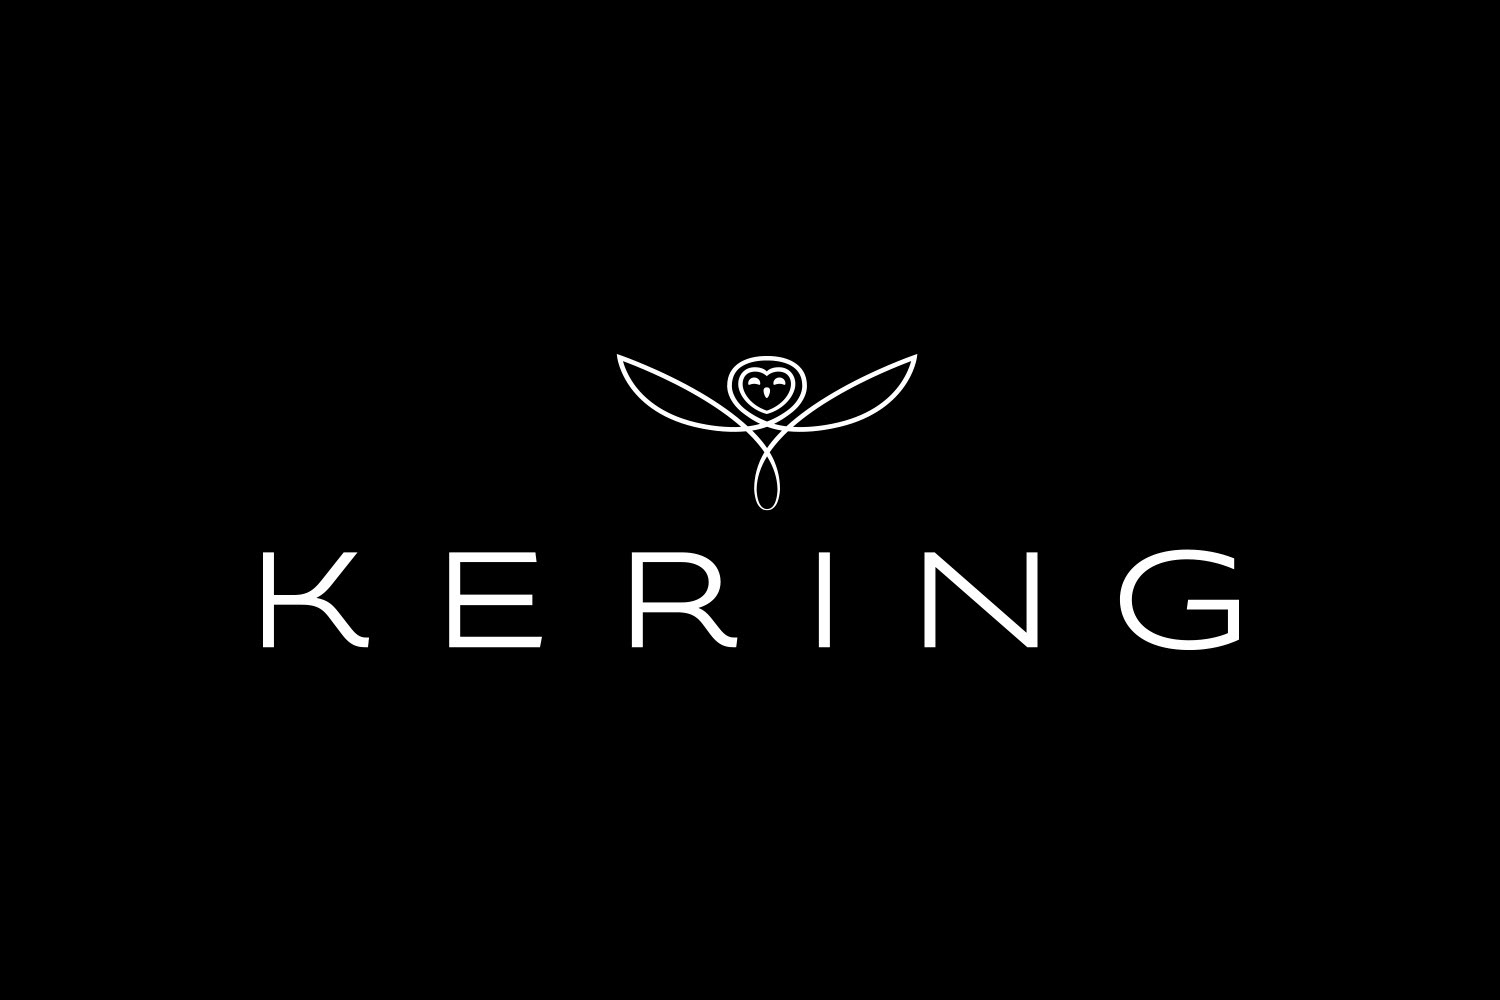 PPR To Change Its Name To Kering